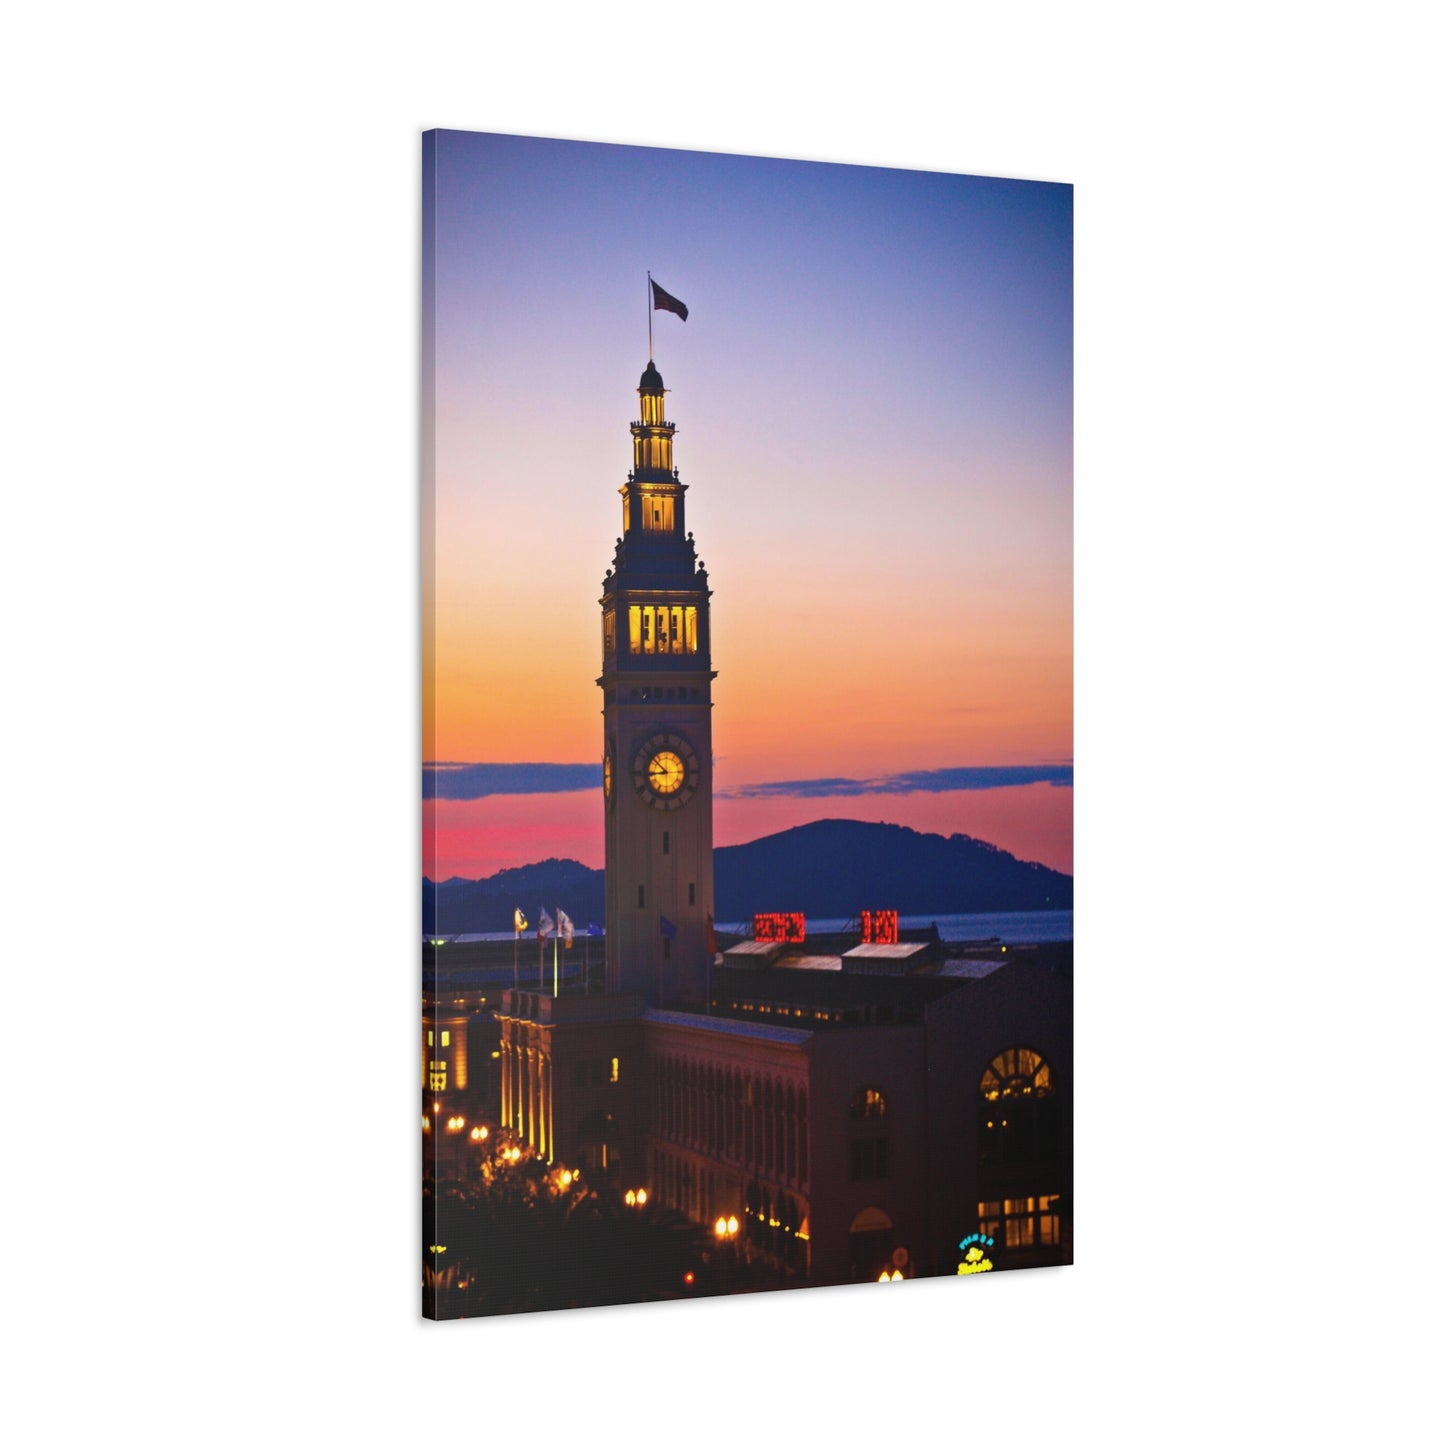 Canvas Print Of The Ferry Building On Embarcadero In San Francisco For Wall Art